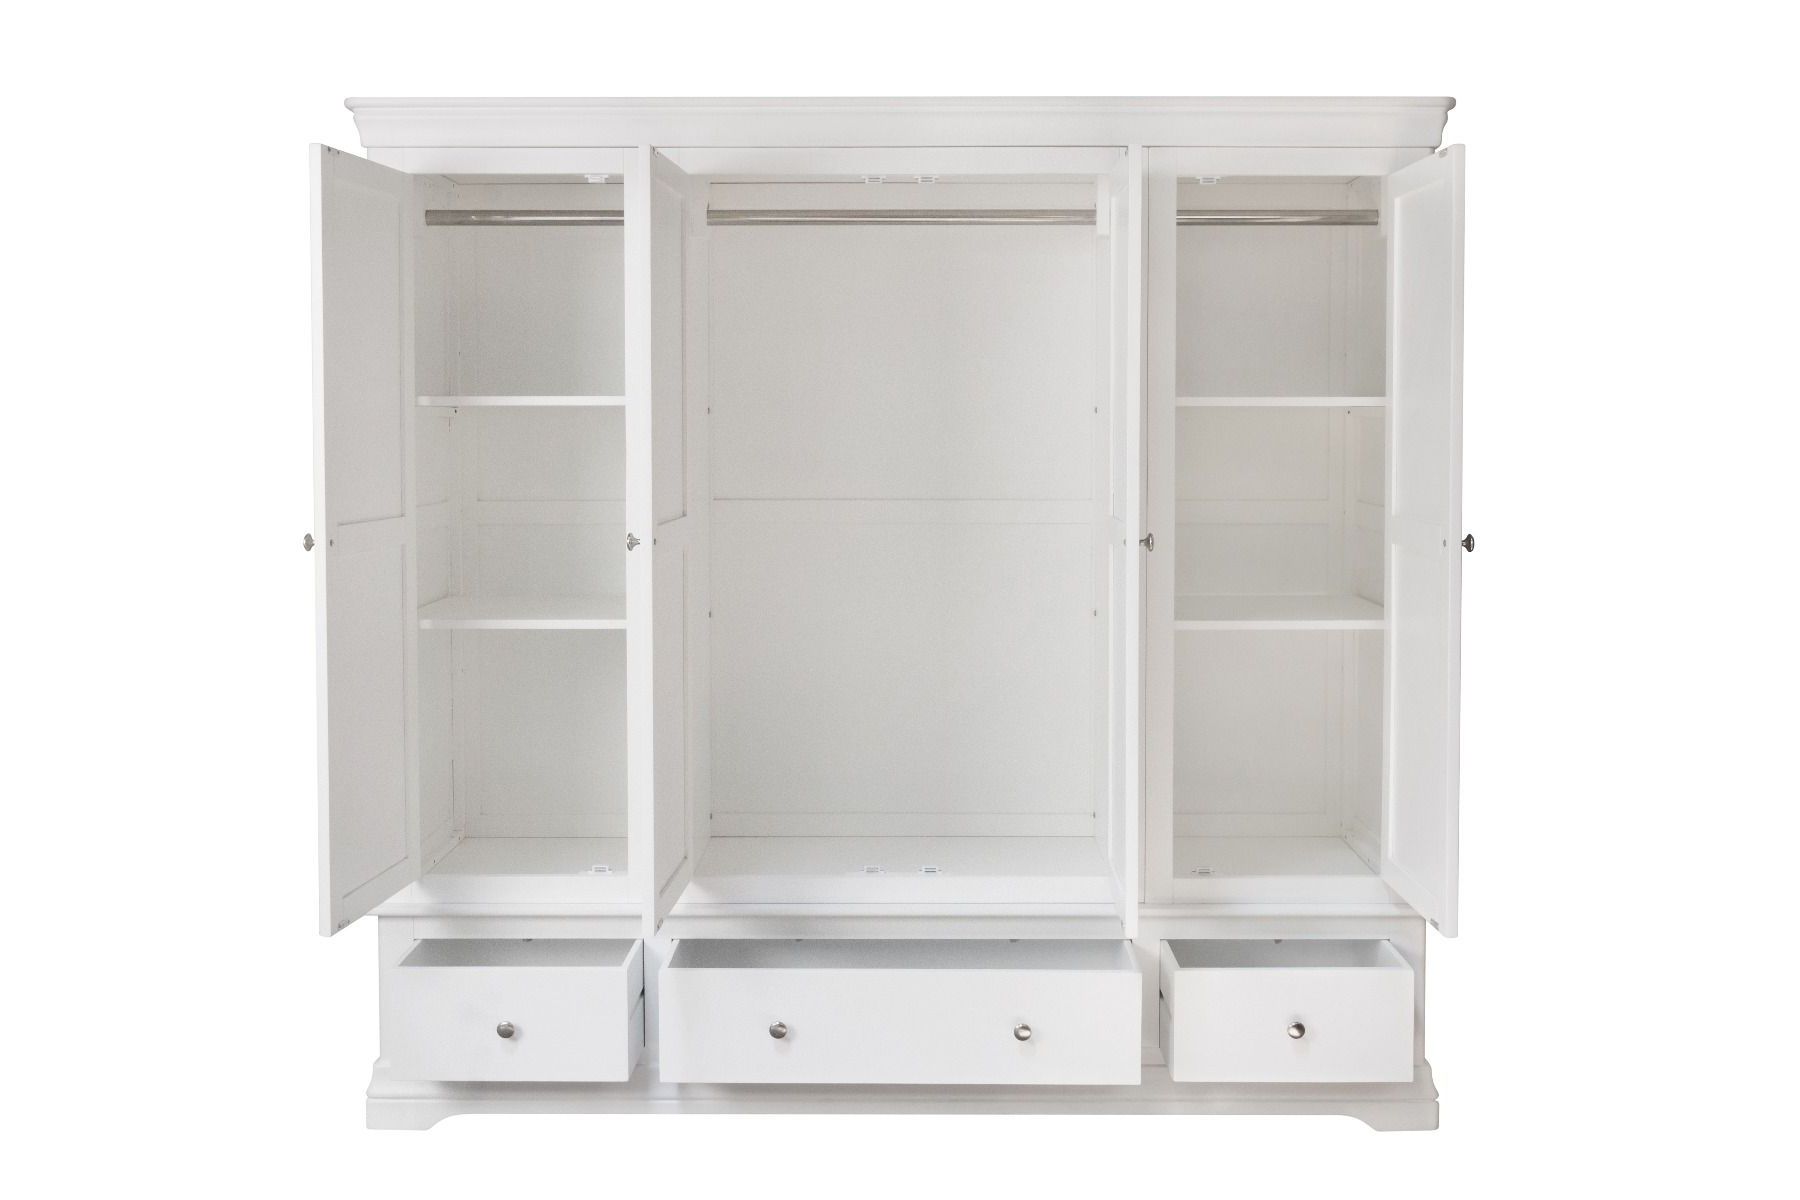 Toulouse White Painted 4 Door Quad Extra Large Wardrobe – Free Delivery |  Top Furniture Throughout Cheap 4 Door Wardrobes (View 5 of 20)